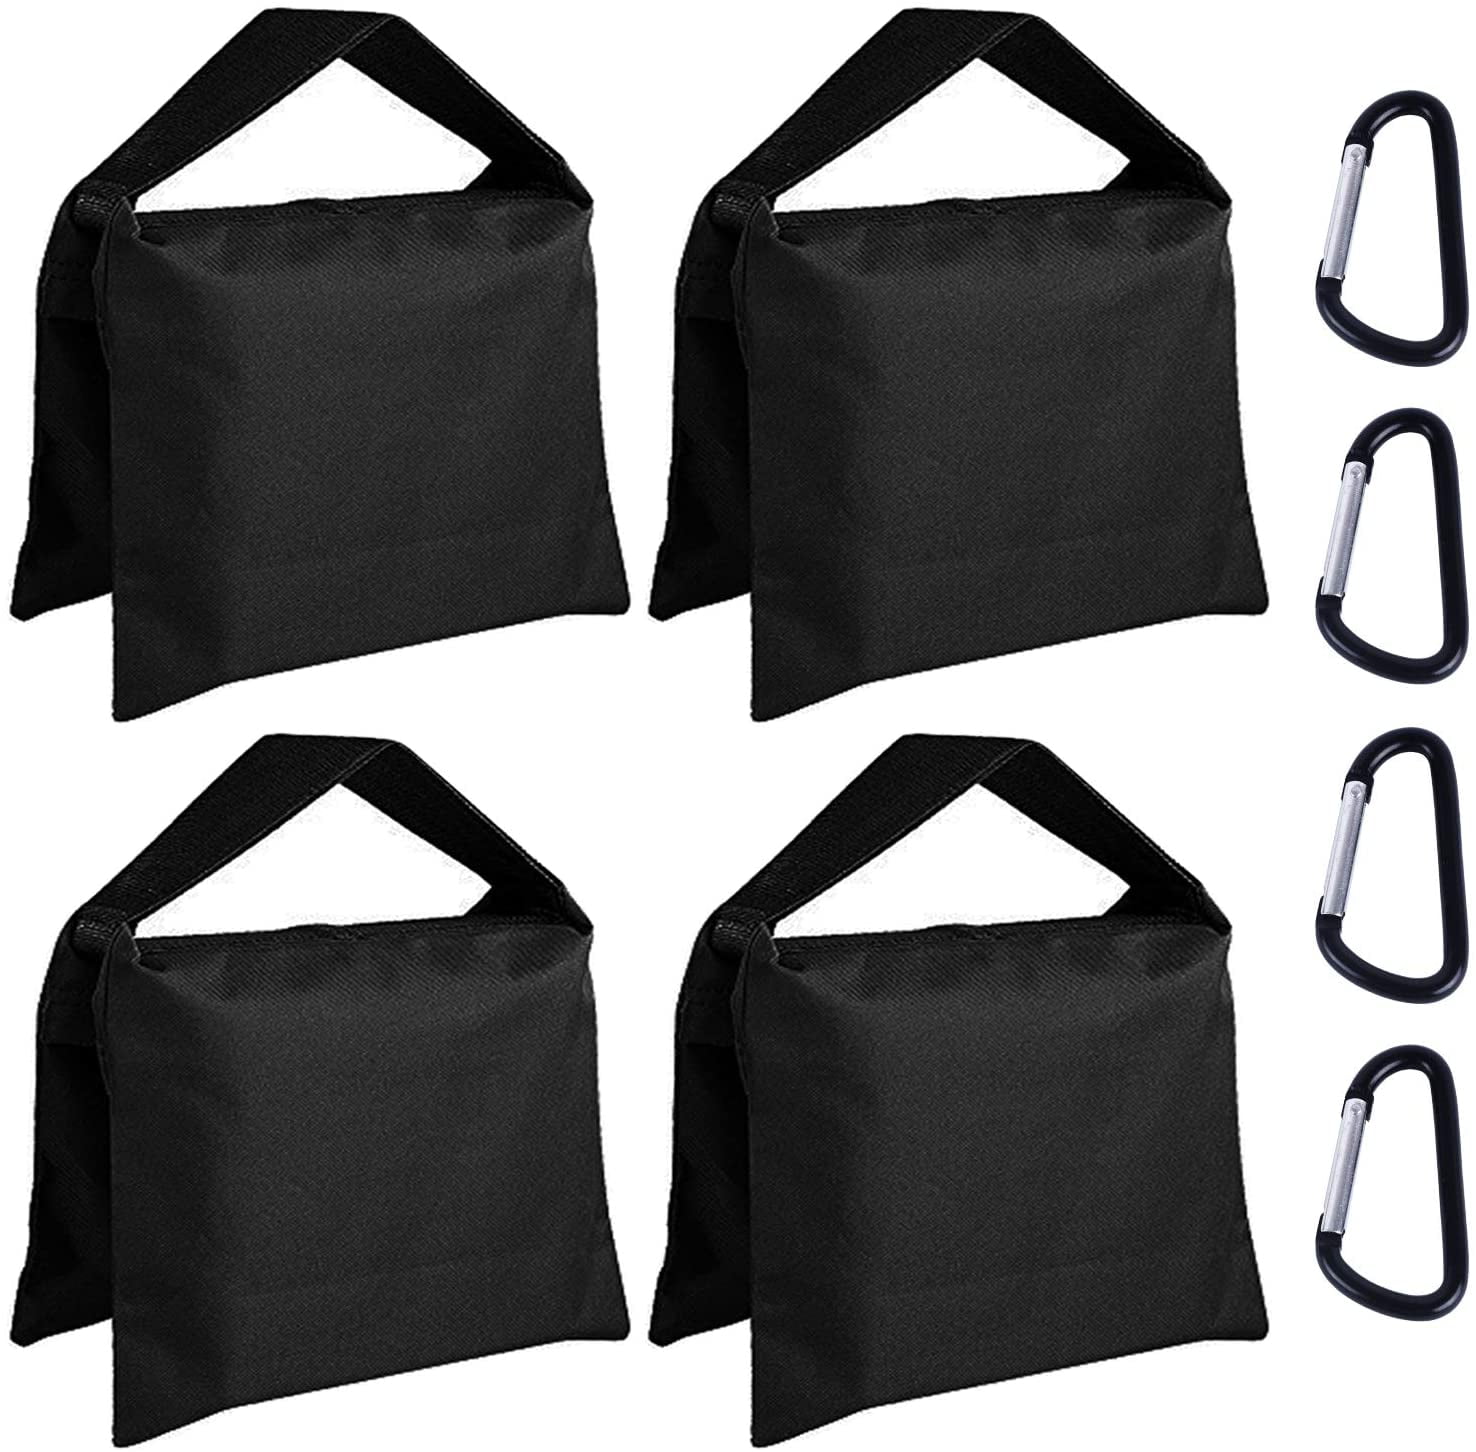 Black Neewer 4-Pack Photography Heavy Duty Sandbag Sand Bags Saddlebag Design 4 Weight Bags for Photo Video Studio Stand Backyard Outdoor Patio Sports Transparent PP Bag and Clips Included 